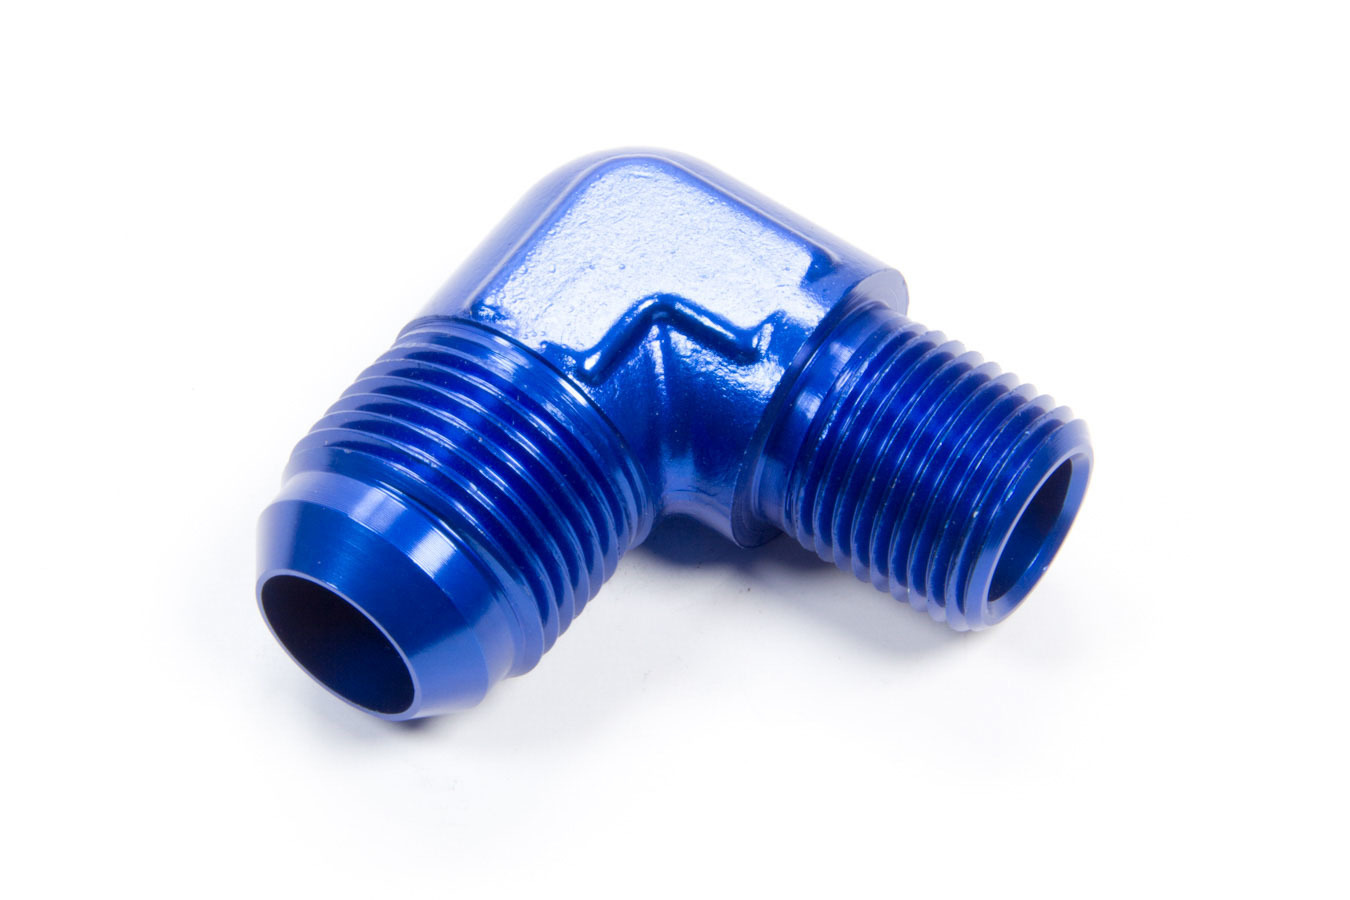 Aeroquip FCM2017 Fitting, Adapter, 90 Degree, 12 AN Male to 1/2 in NPT Male, Aluminum, Blue Anodized, Each